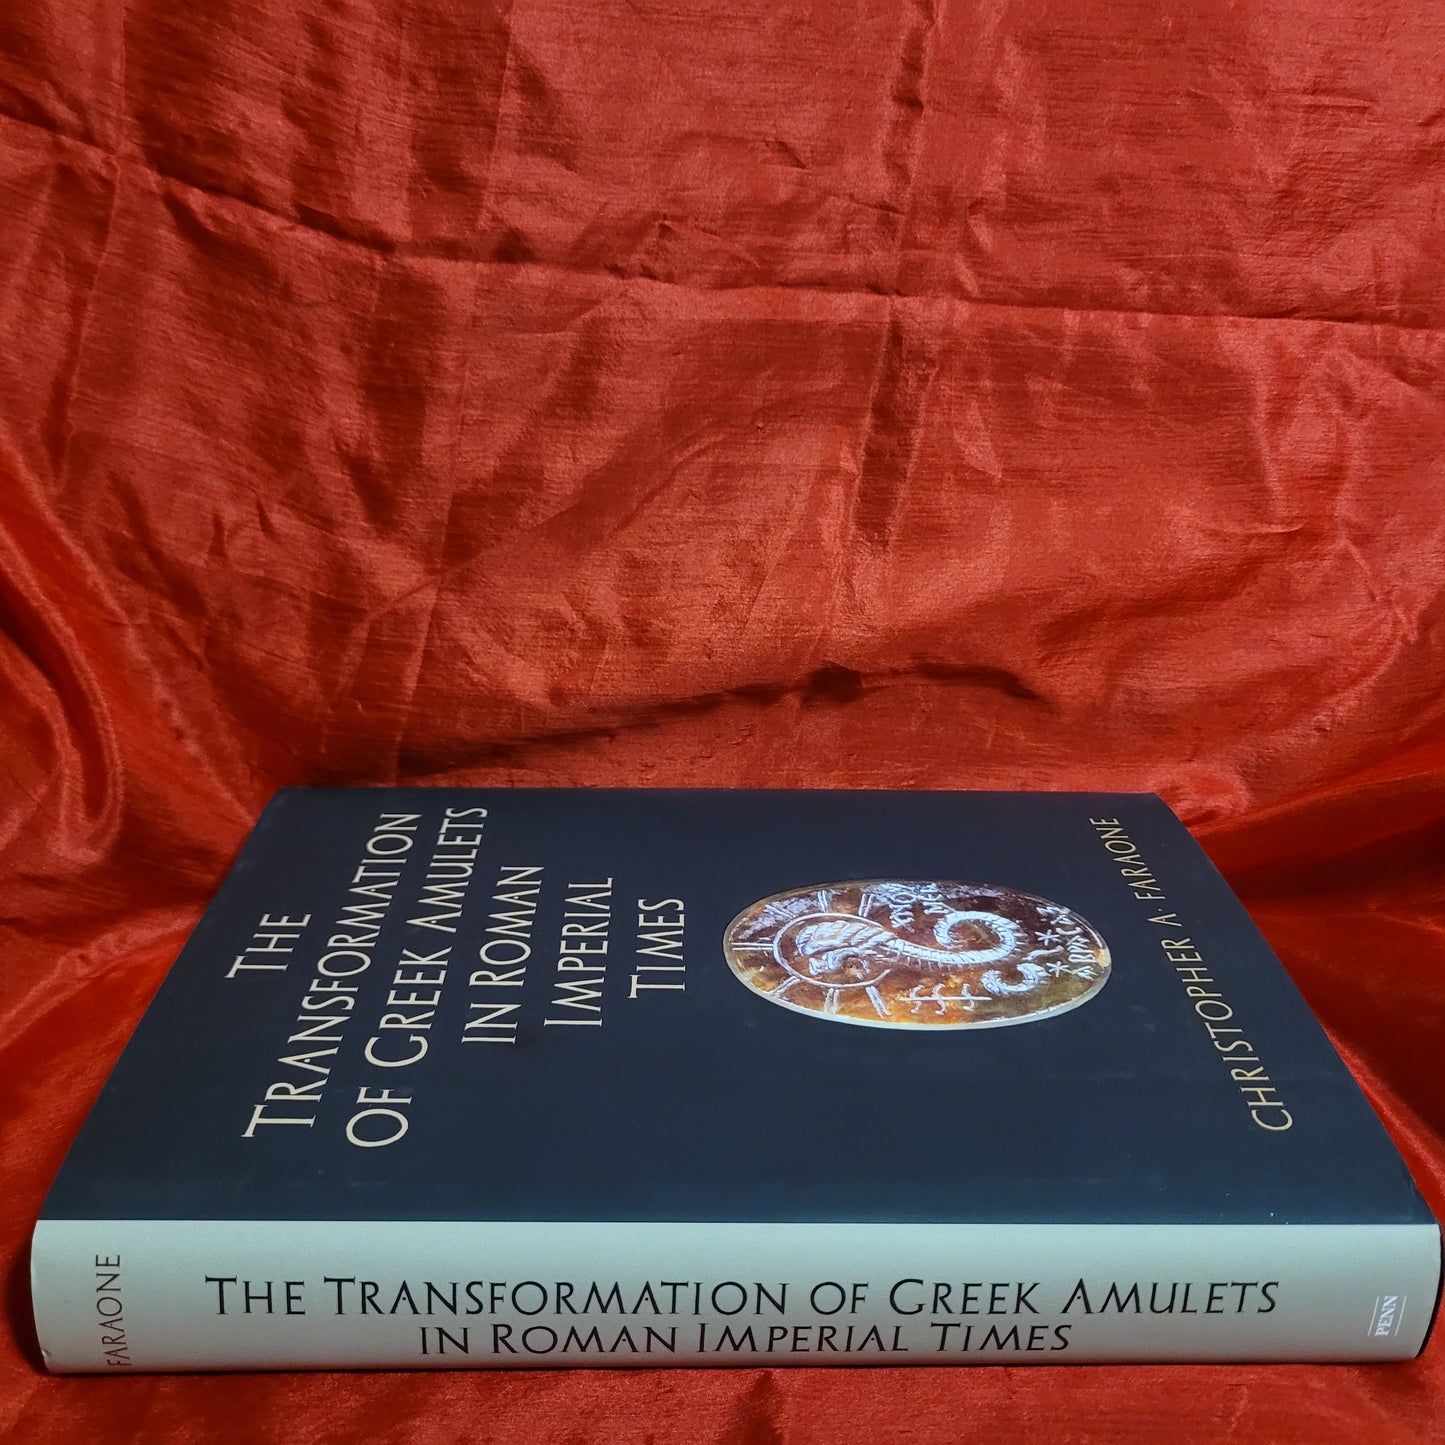 The Transformation of Greek Amulets in Roman Imperial Times by Christopher A. Faraone (University of Pennsylvania Press, 2018) Hardcover